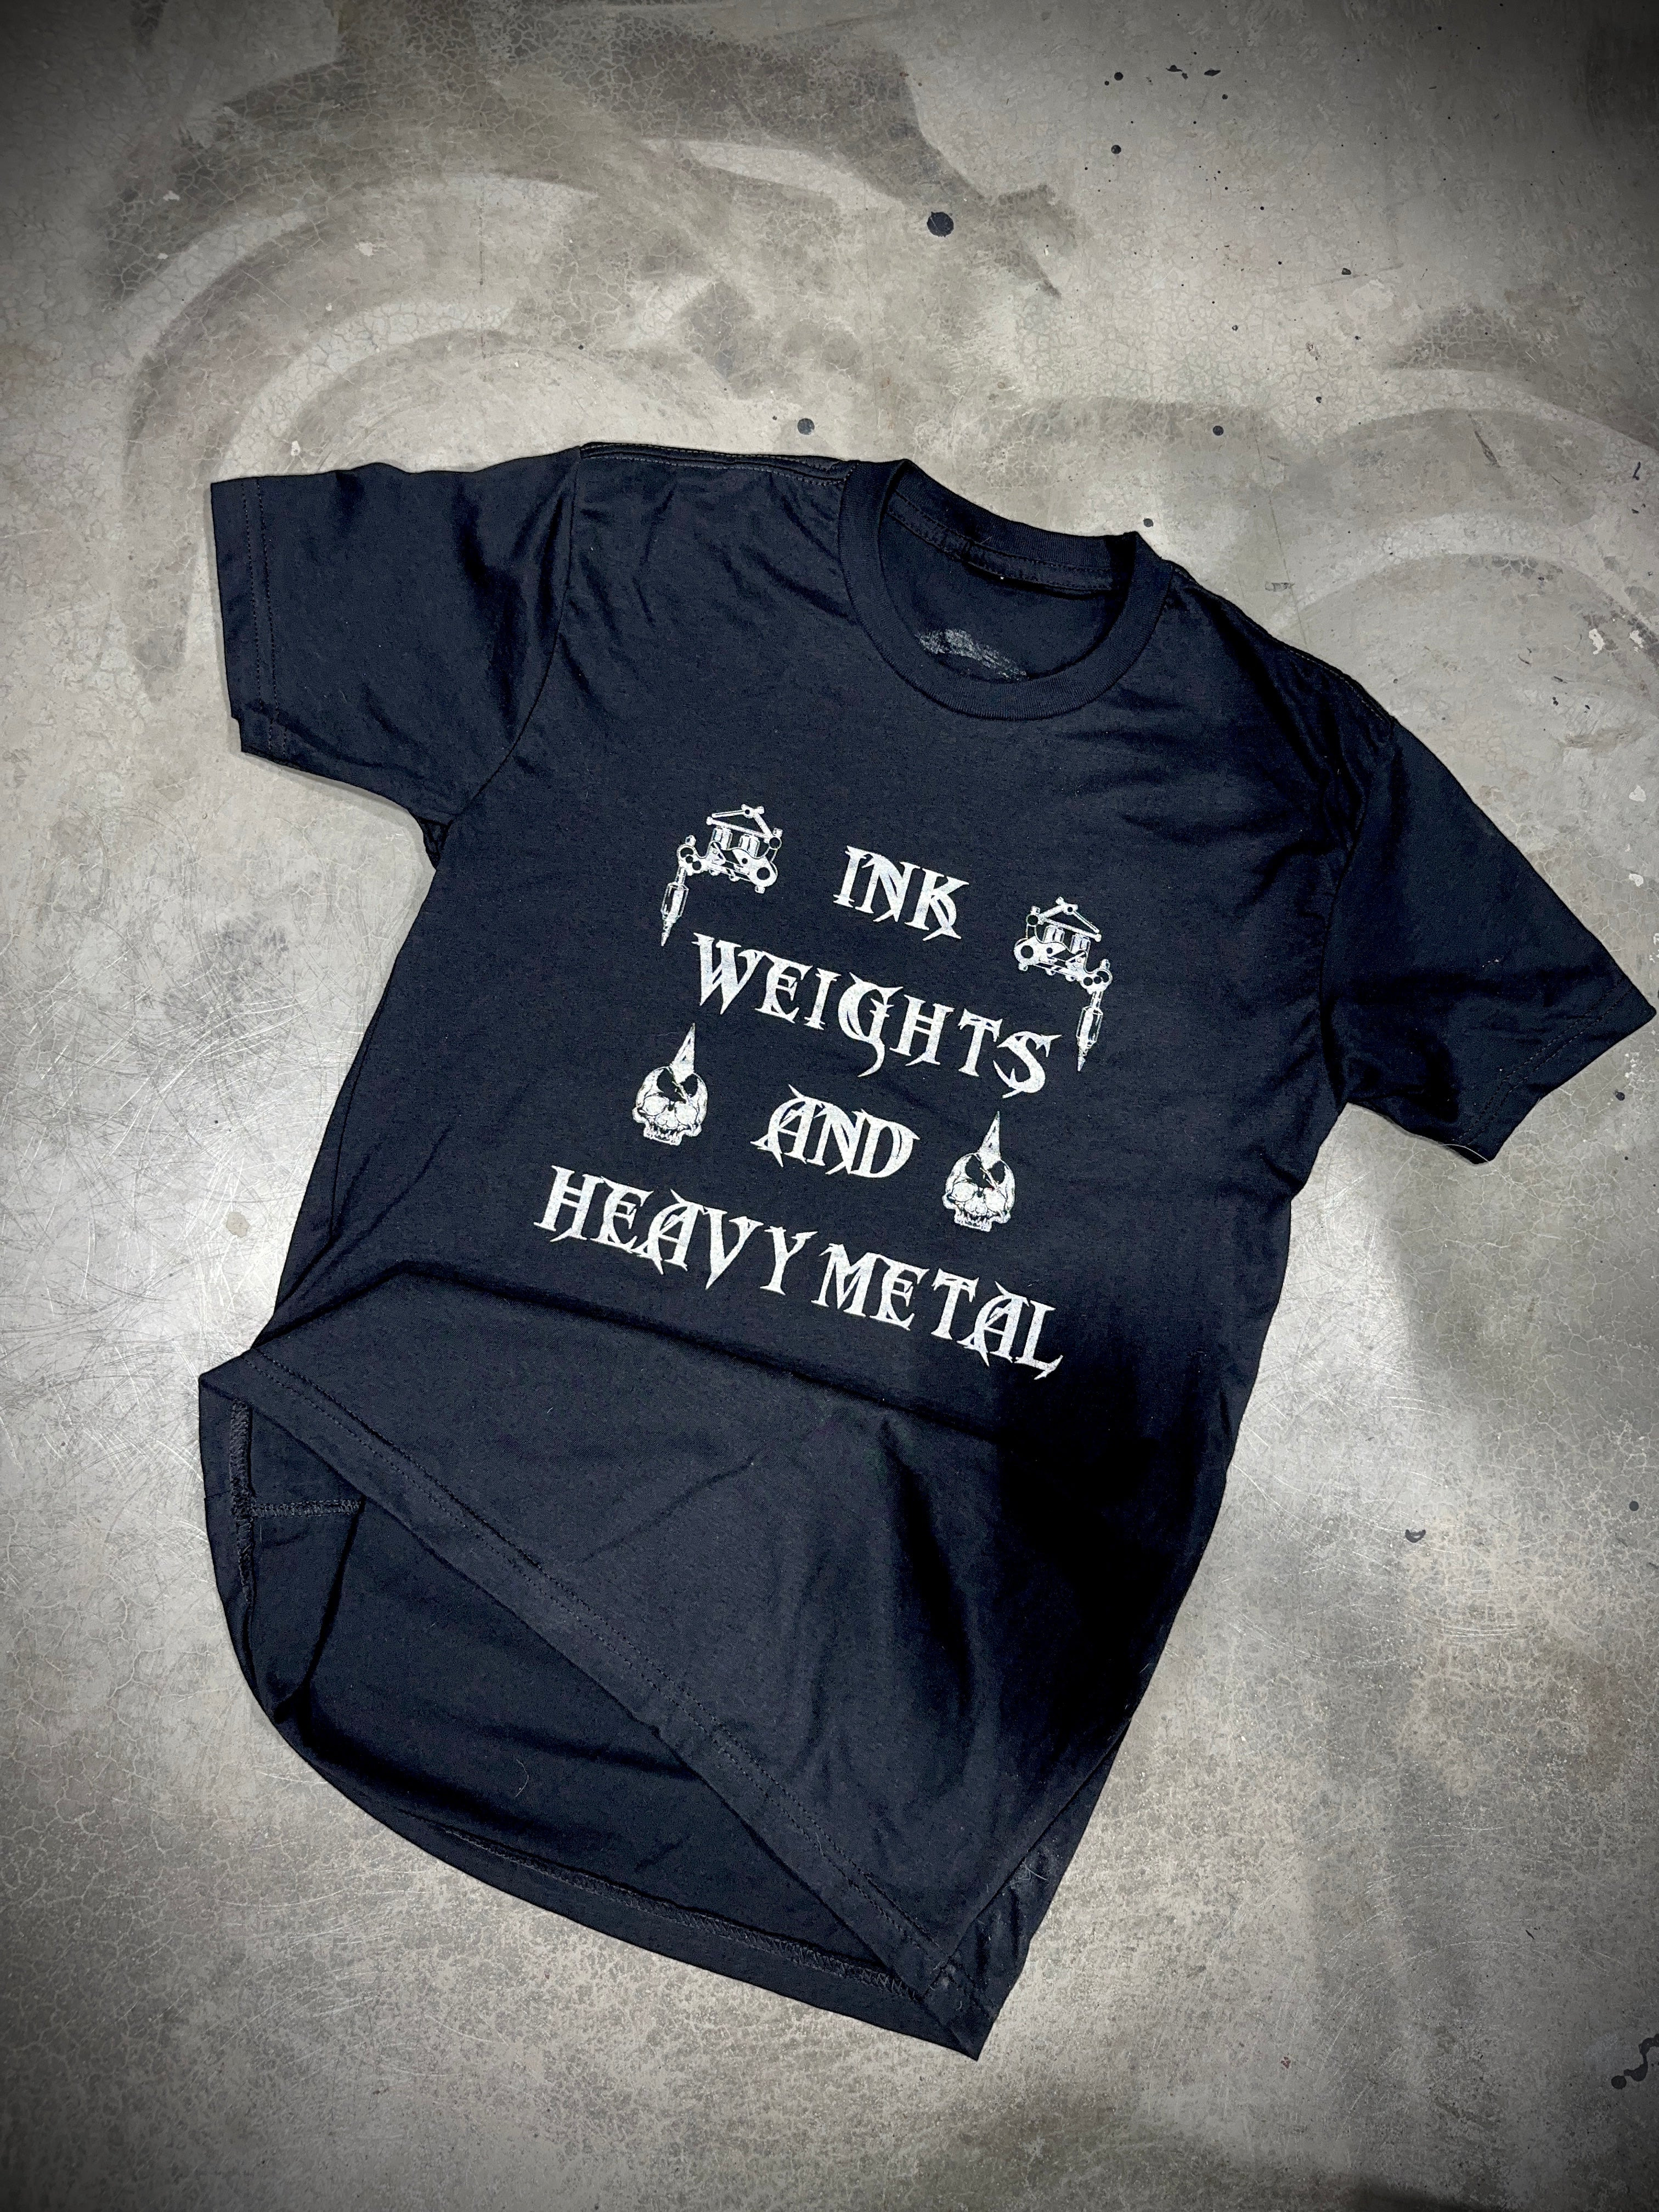 Ink-Weights-Heavy Metal Tee - Dude That Lifts